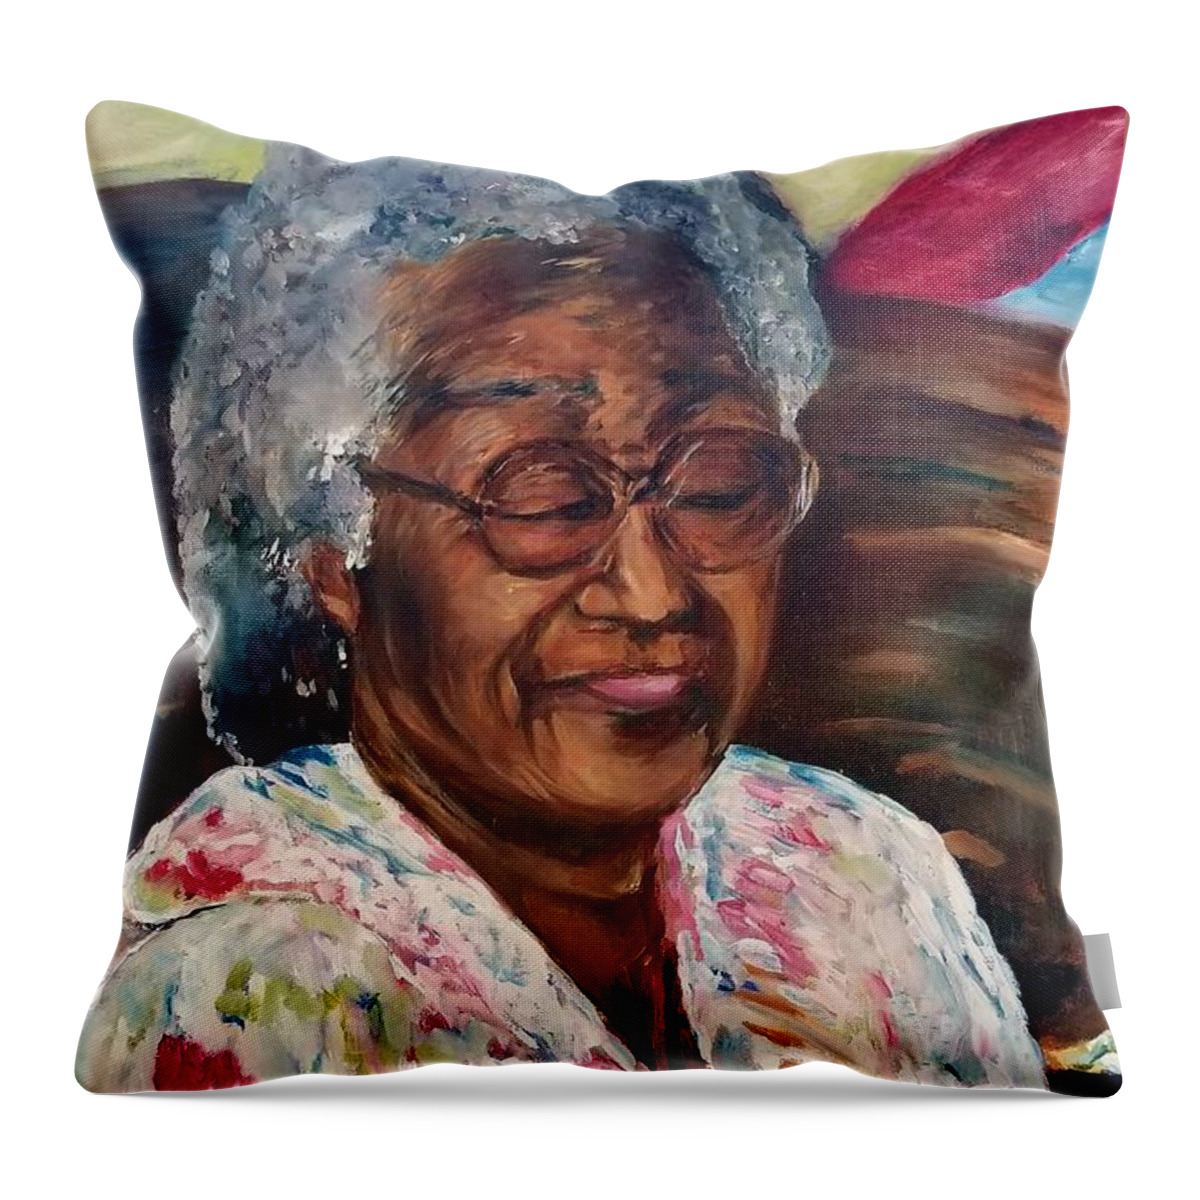 Portraits Throw Pillow featuring the painting Mama by Julie TuckerDemps